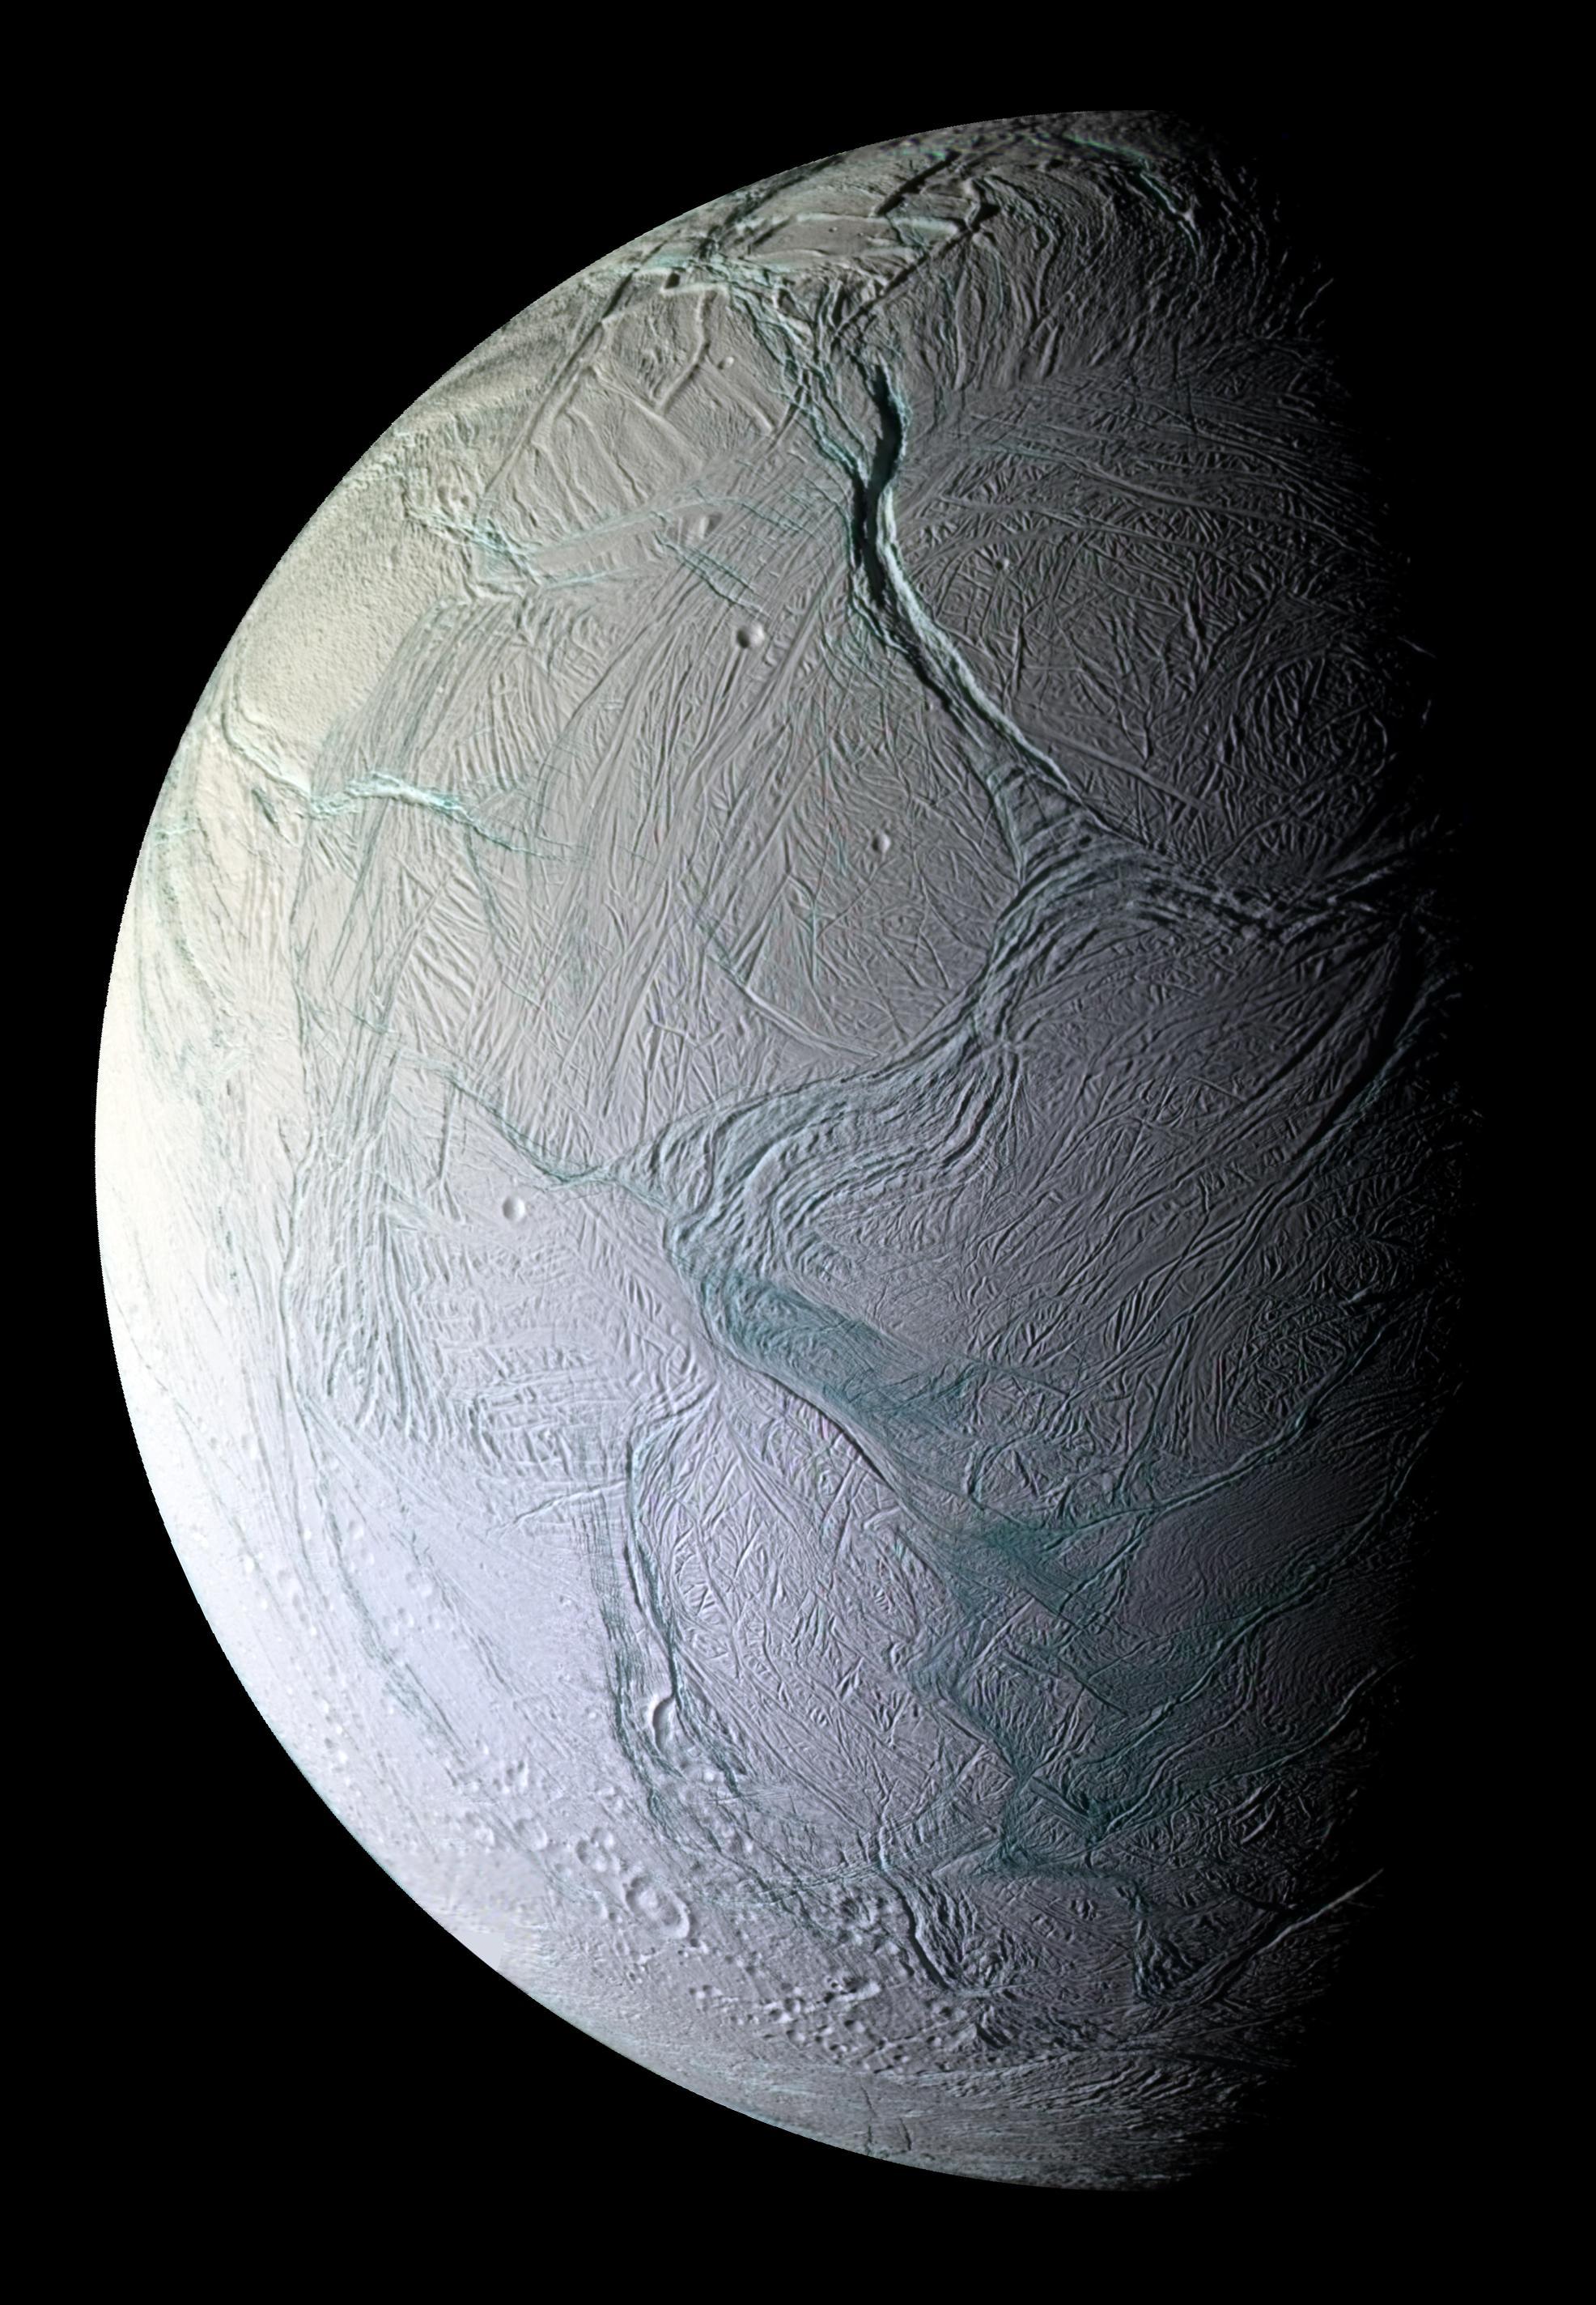 Webb detects large water vapor plume jetting from Saturn’s icy ocean moon